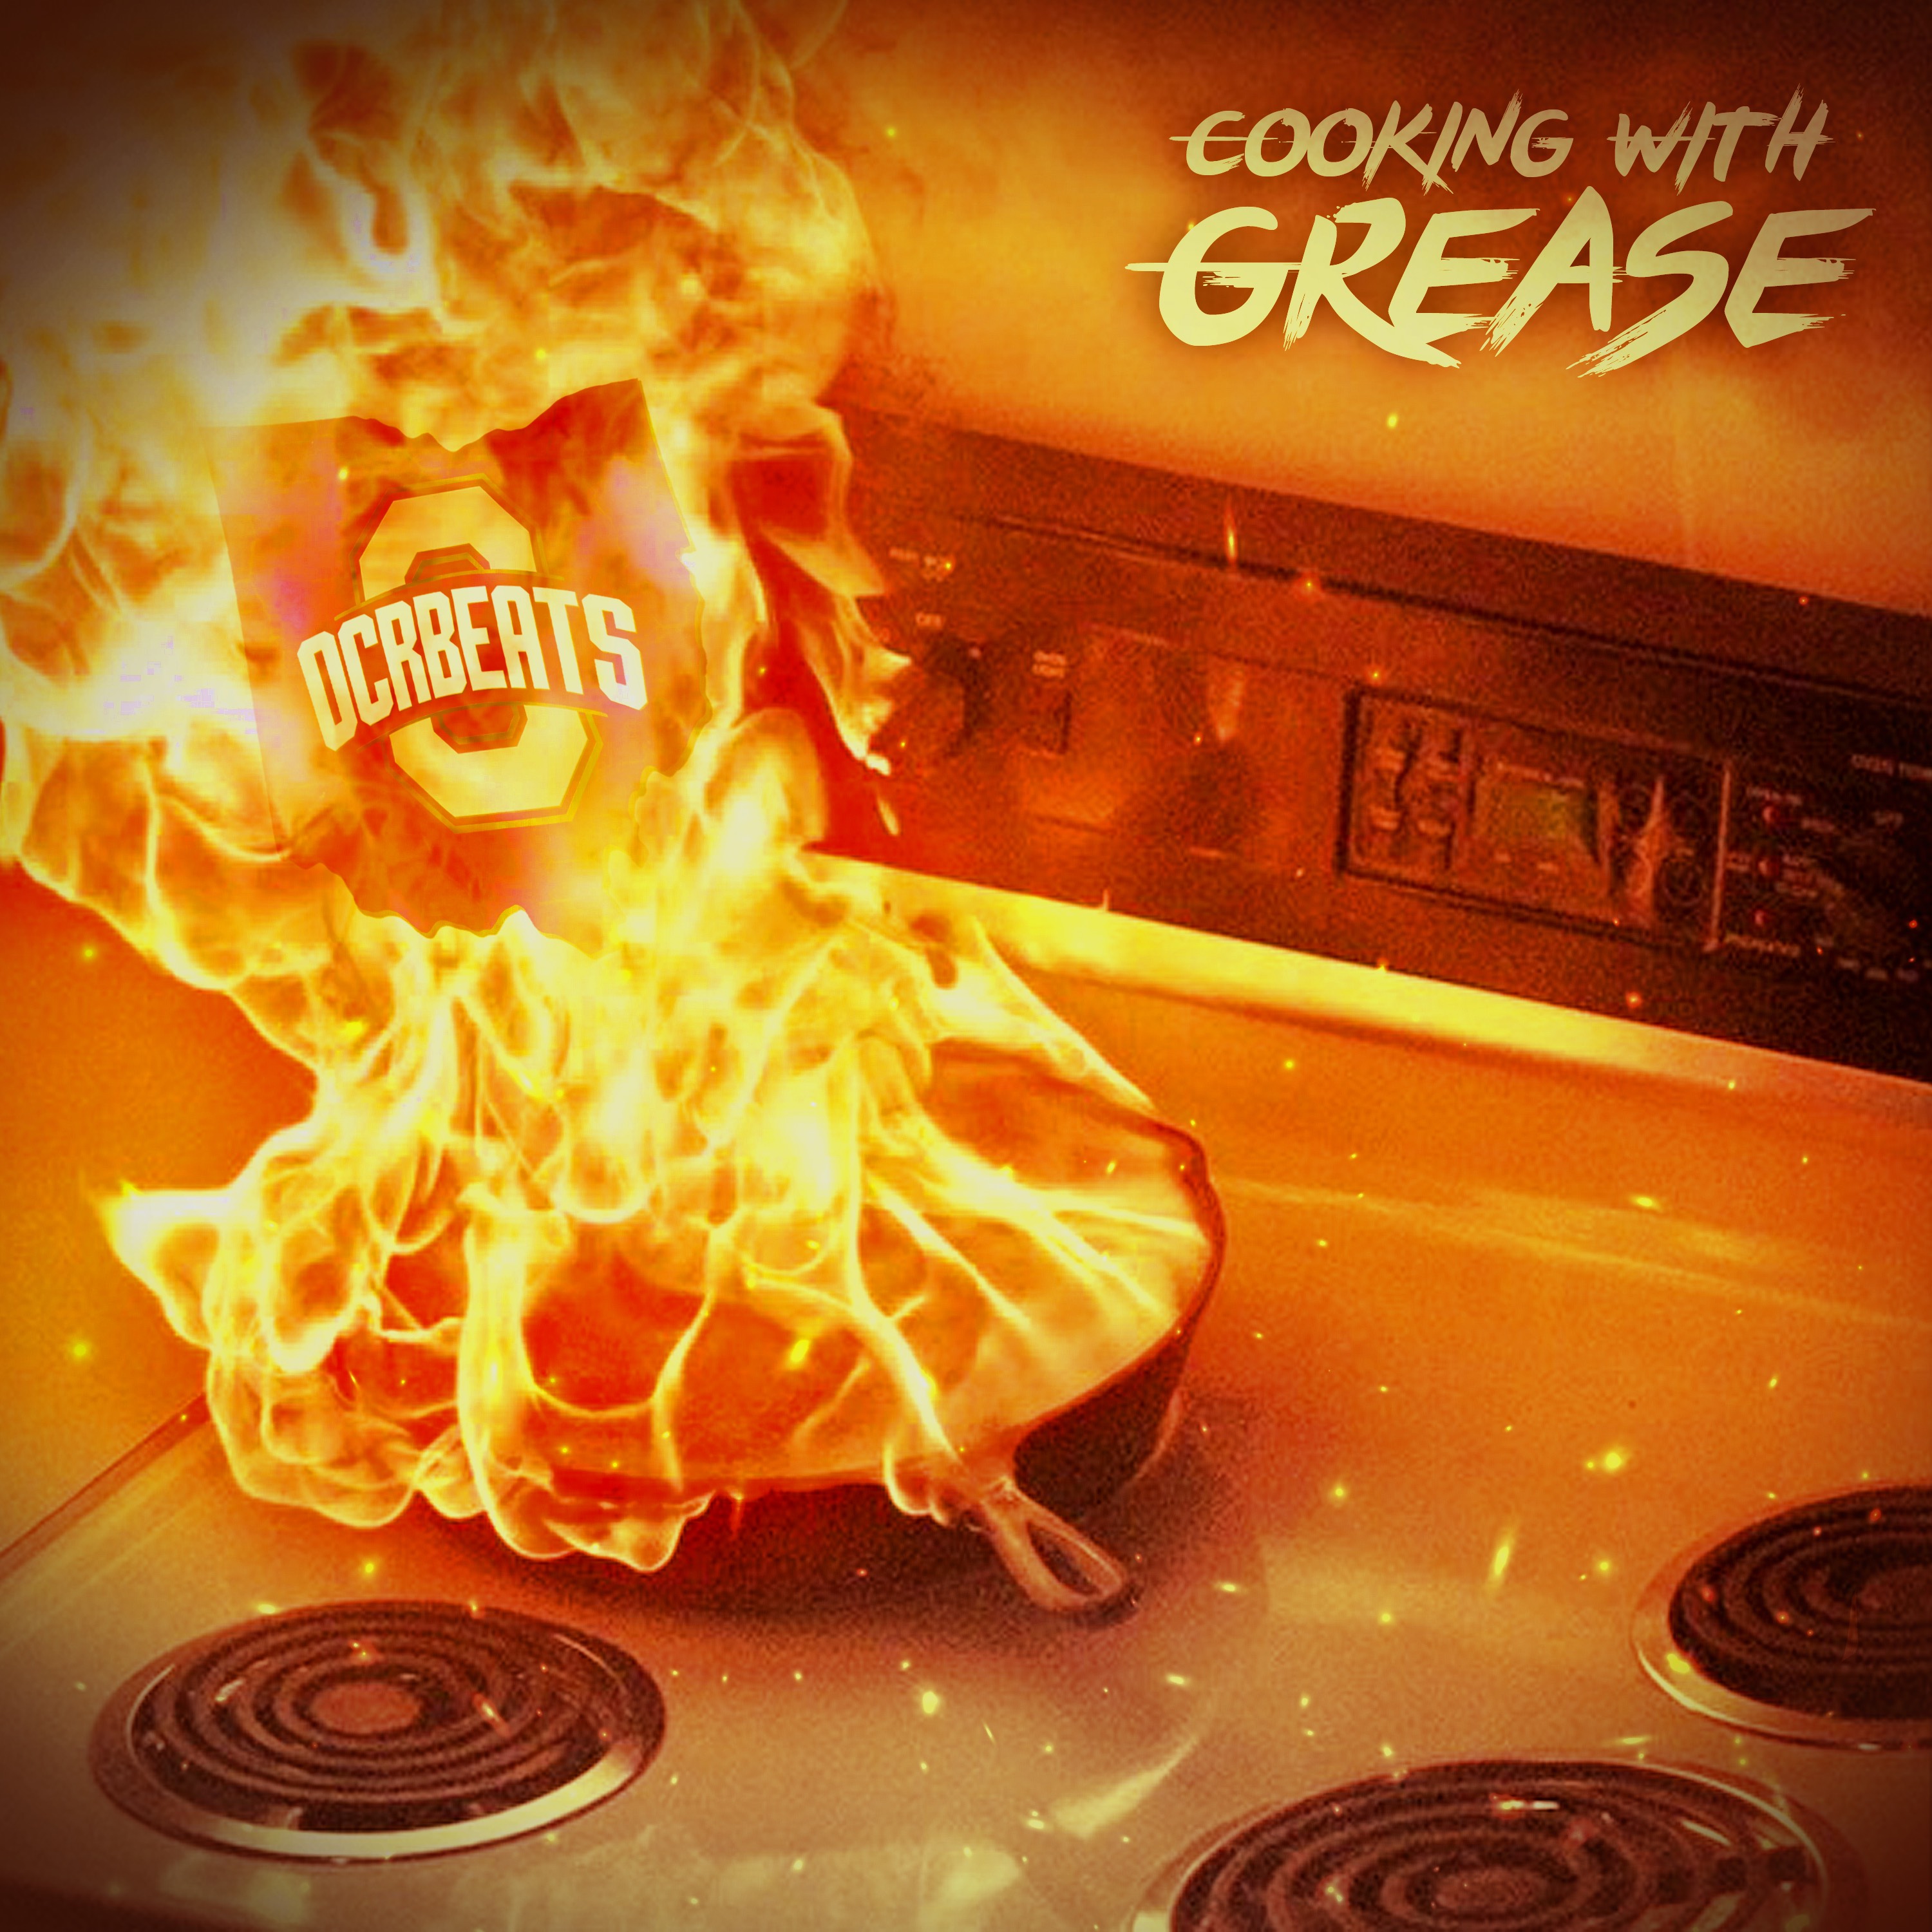 Art for Cooking With Grease by OCRBeats